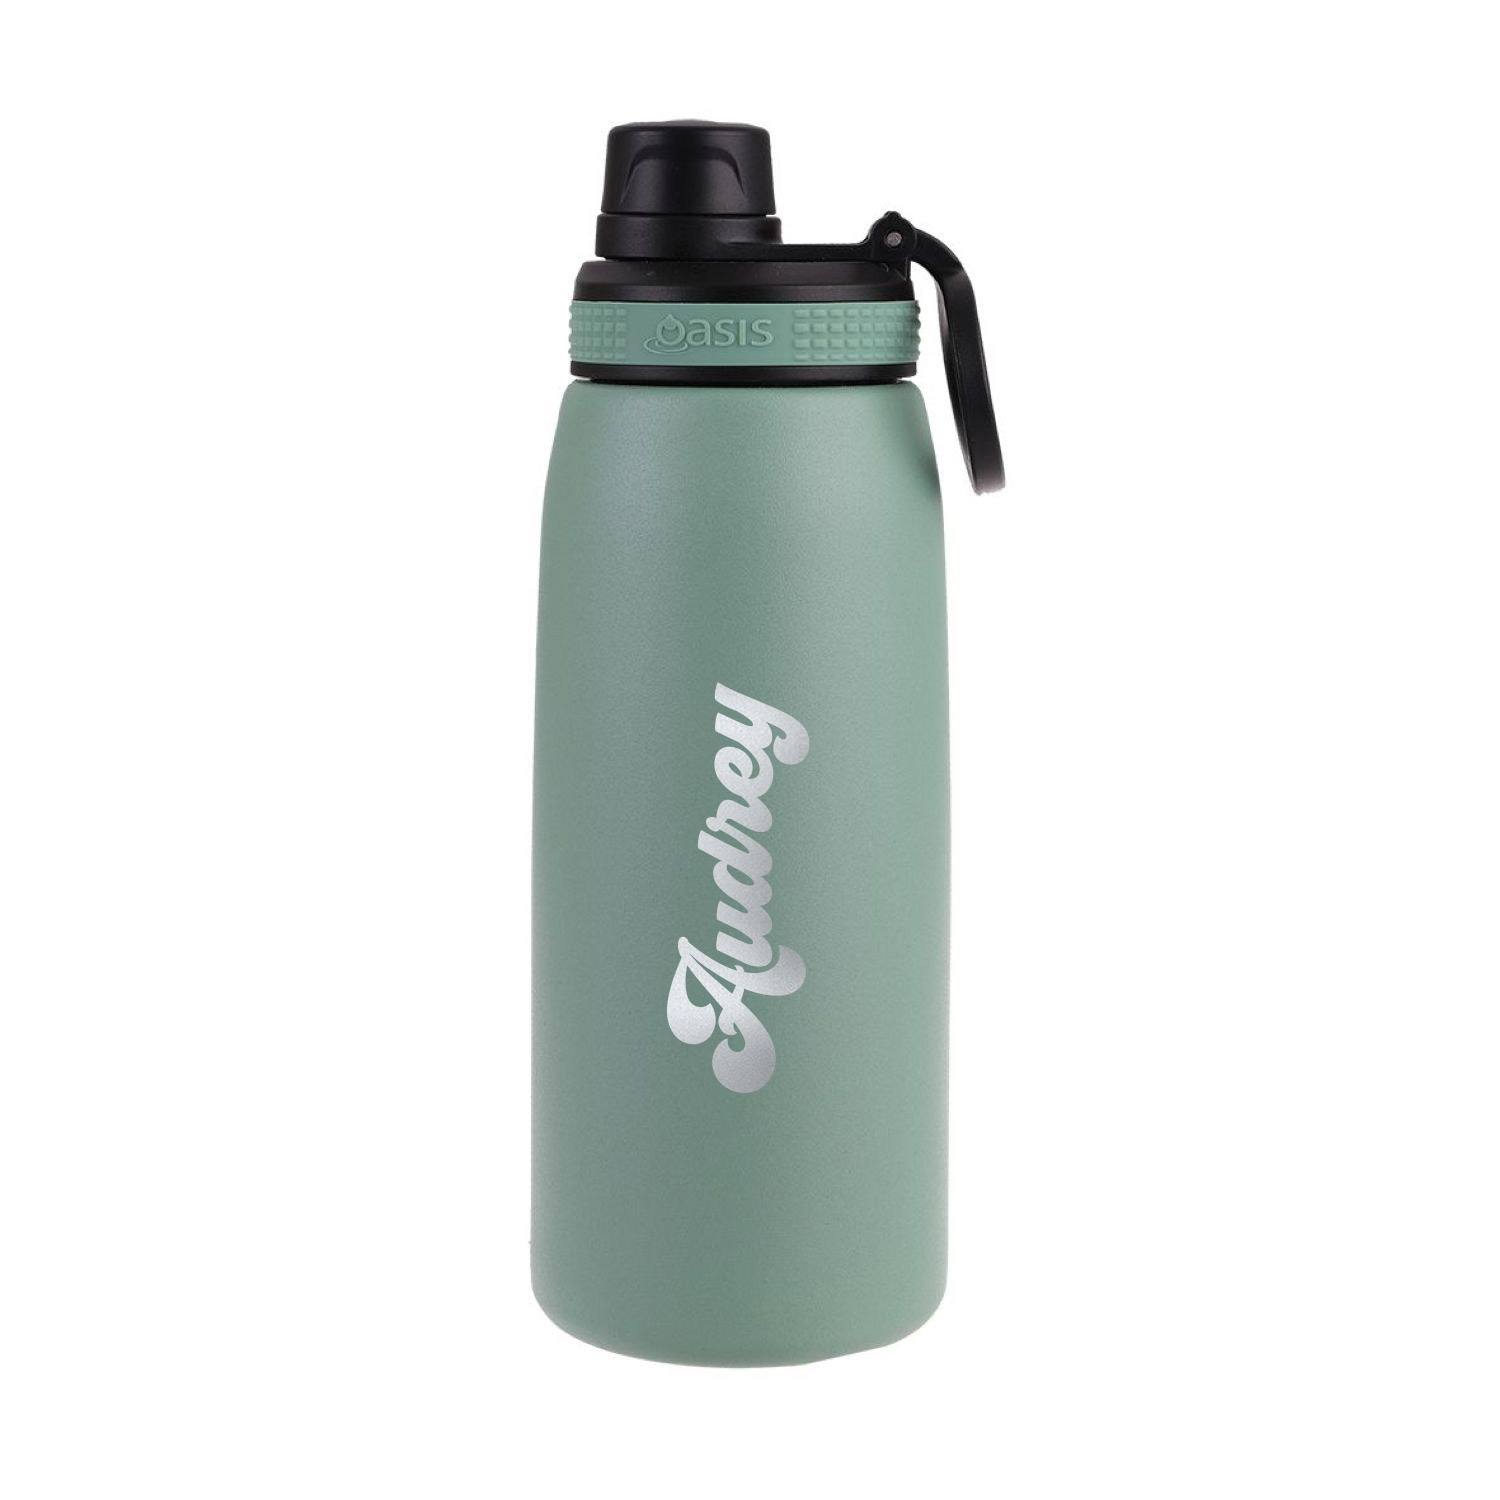 Custom Oasis Engraved Insulated Sports Water Bottle with Screw Cap - Sage Green